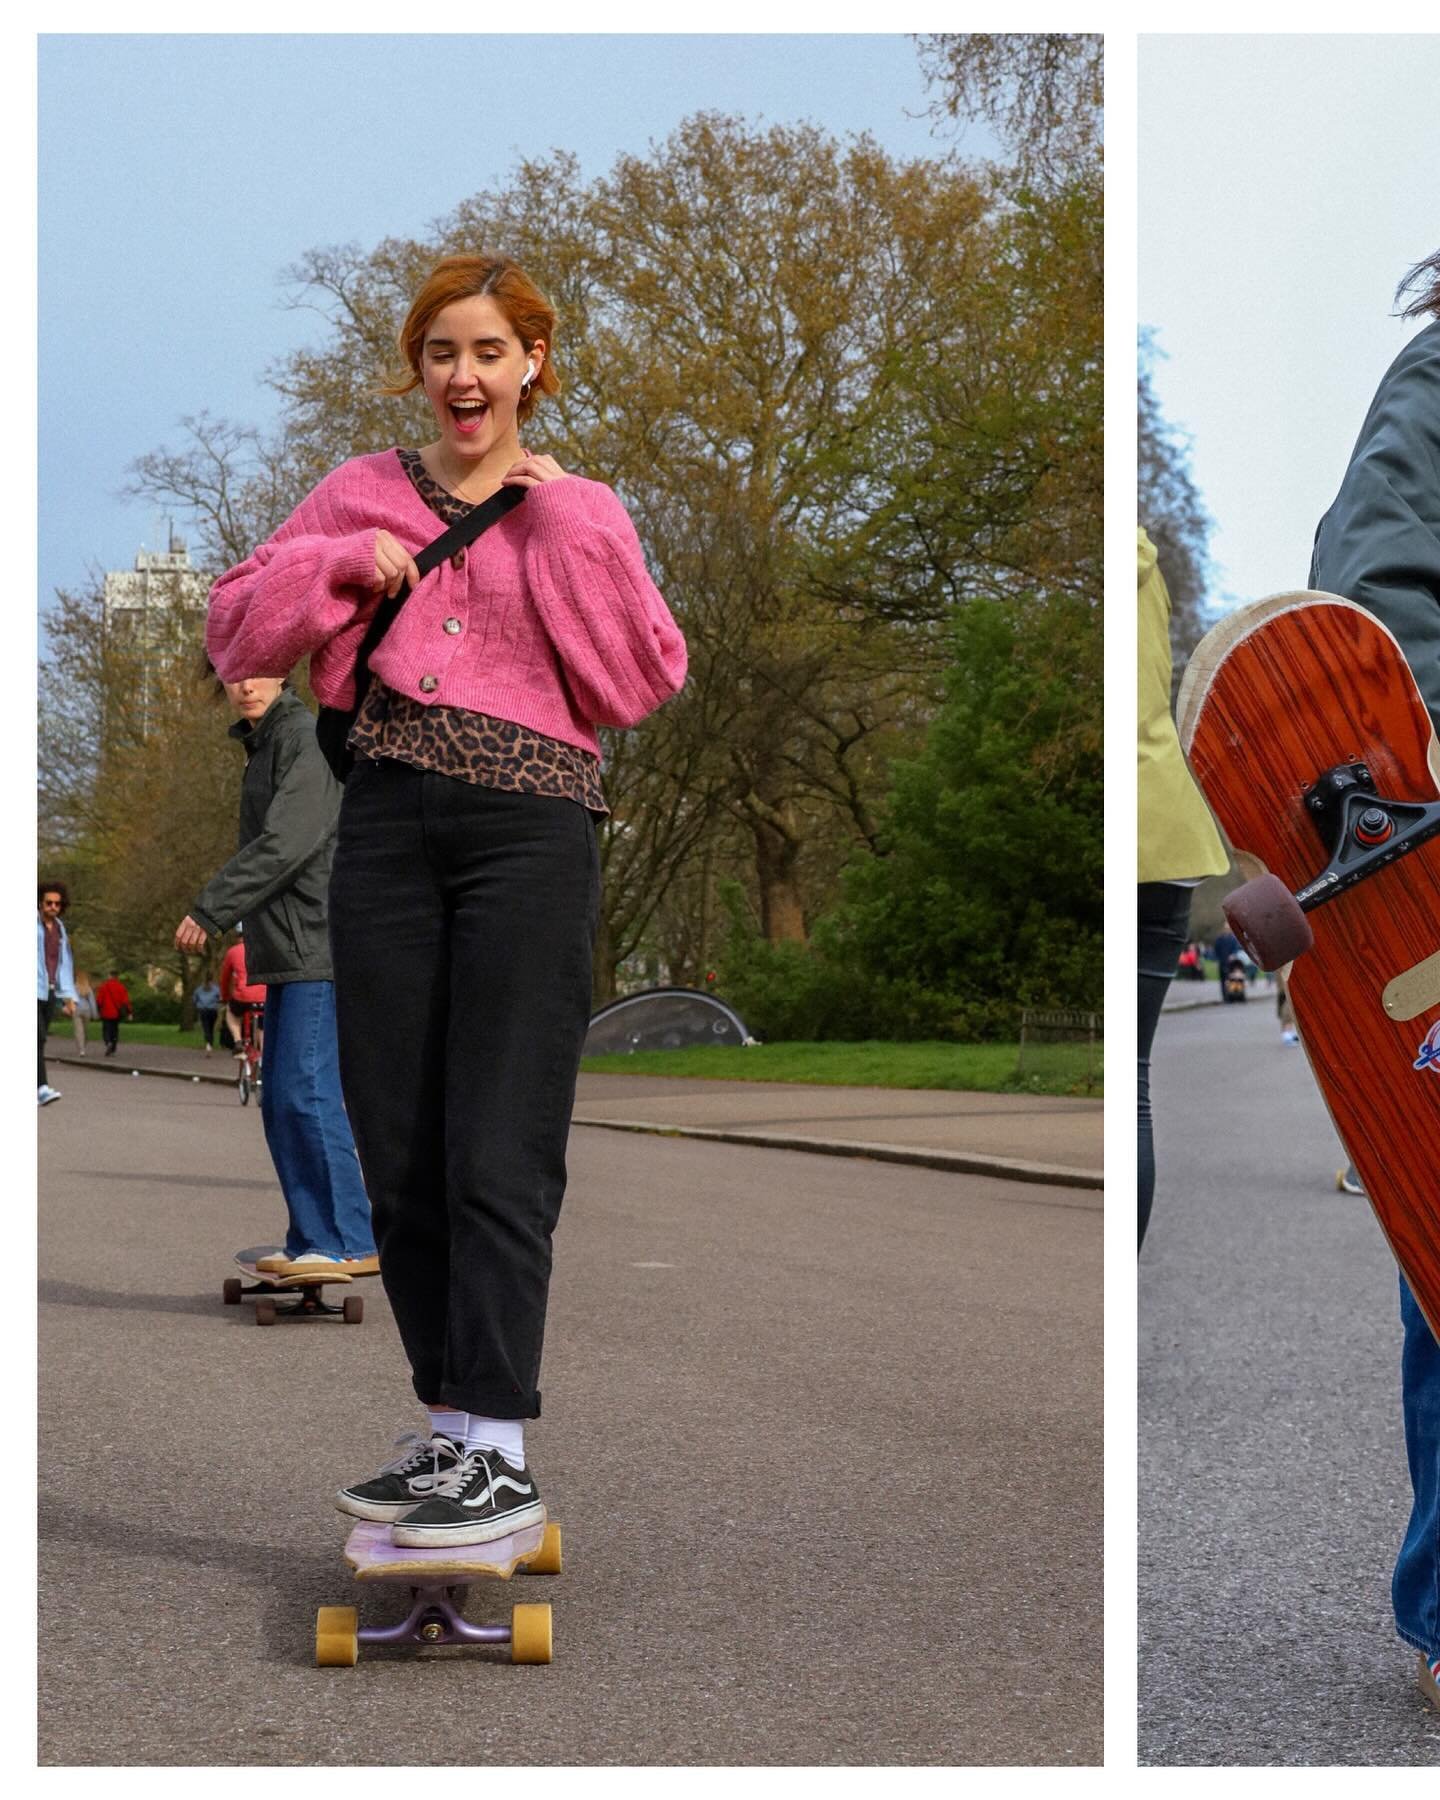 3 sunny reminders: 1) Spring is finally here 🌞💐, 2) our spring meetup is NEXT SATURDAY 🌸🌼 and 3) life is good! and it&rsquo;s even better with friends and boards 👯🛹

📍4-6pm in Hyde Park, in front of the Albert Memorial
🛹 All levels welcome!

